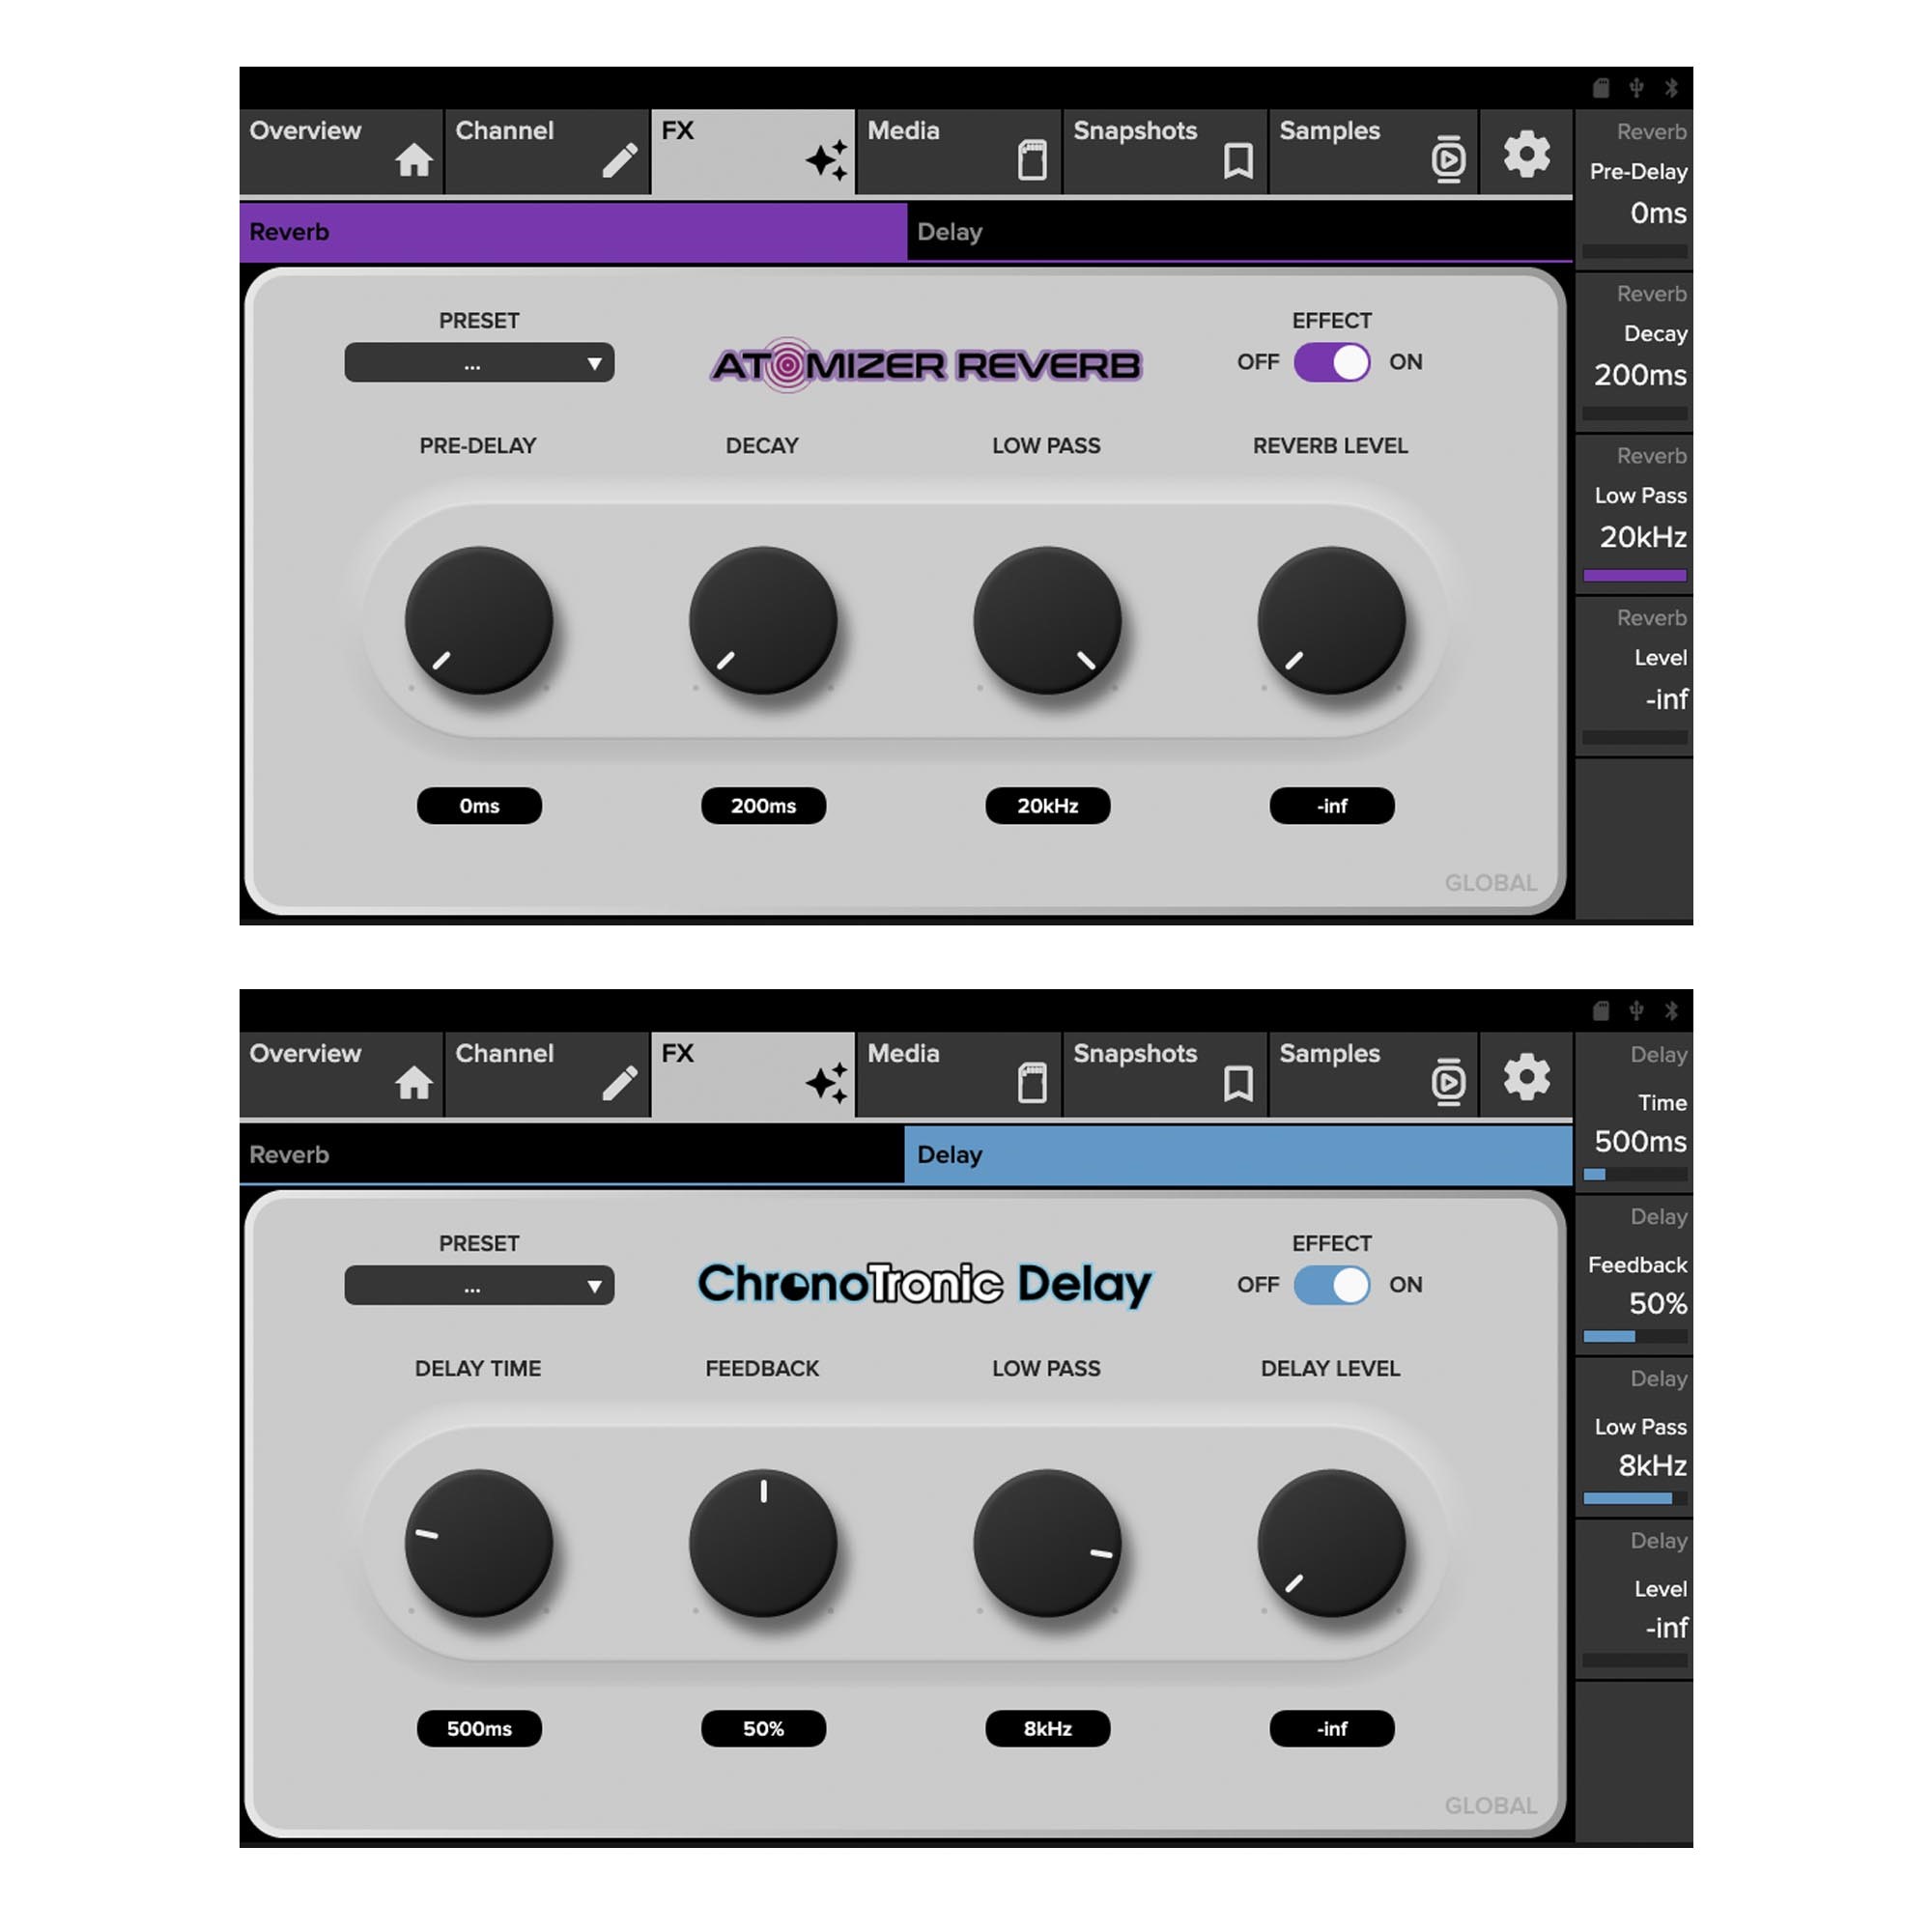  Mackie DLZ Creator Adaptive Digital Mixer for Podcasting,  Streaming and  with User Modes, Mix Agent Technology, Auto Mix,  Onyx80 Mic Preamps : Musical Instruments